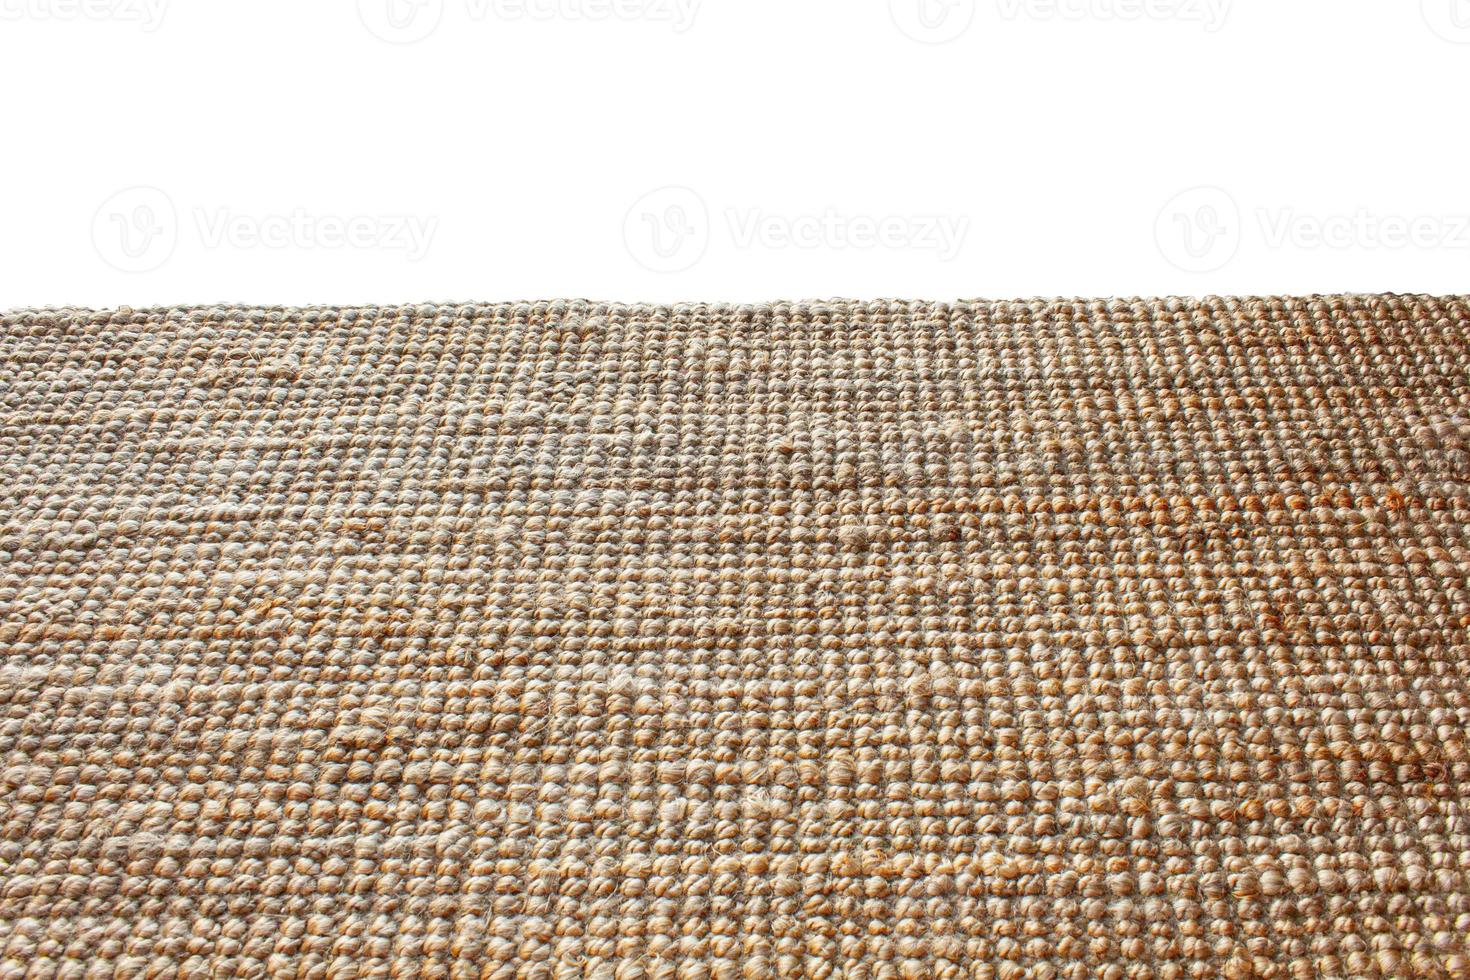 sack pattern canvas sack cloth woven texture pattern background photo